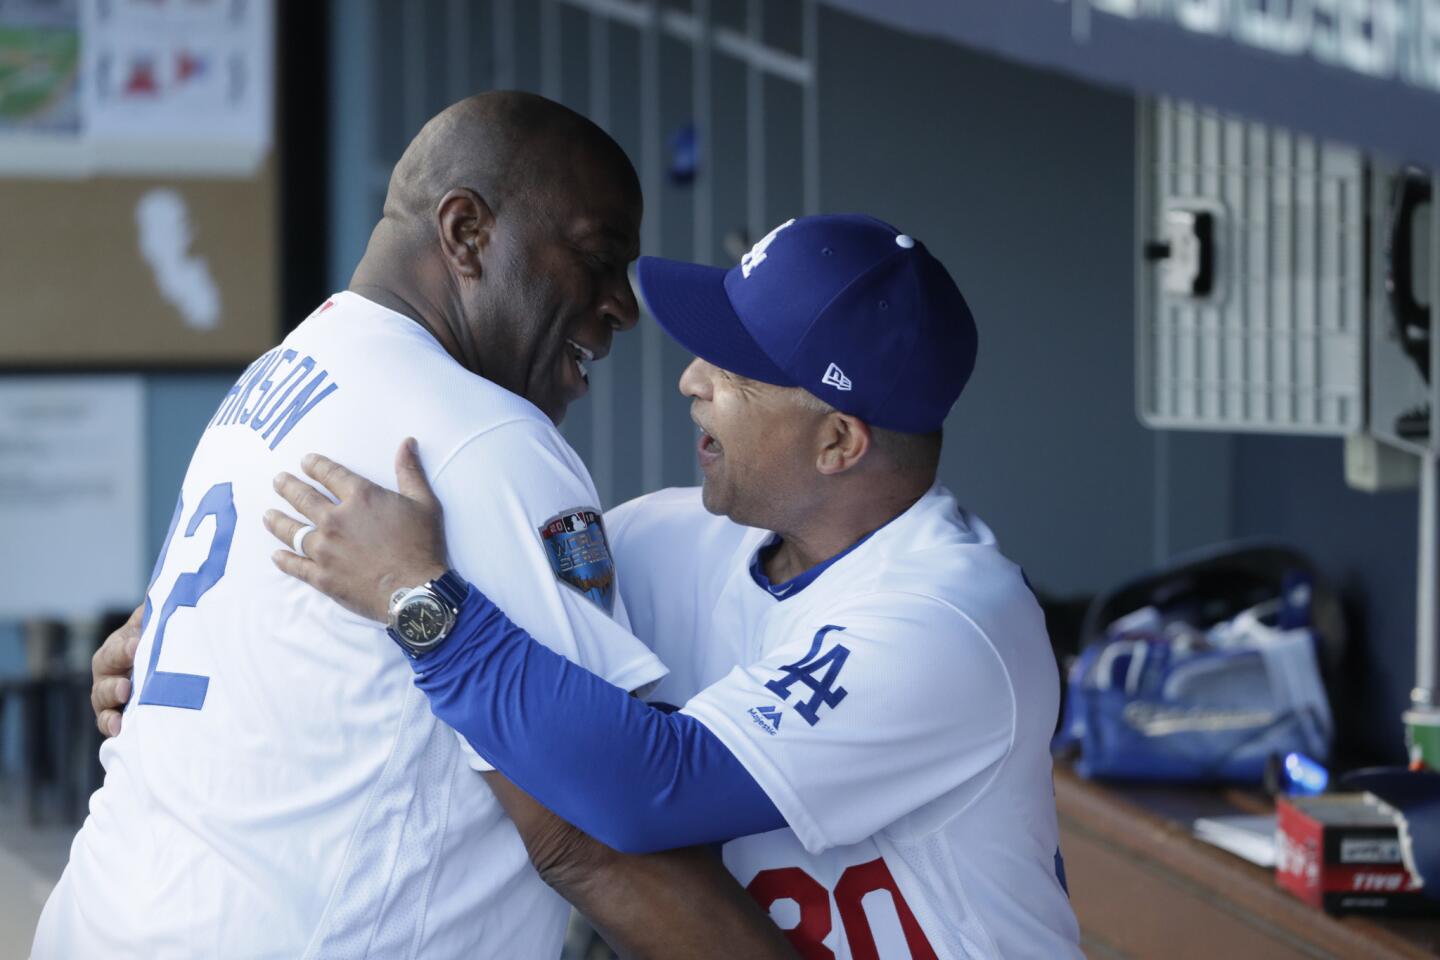 Magic Johnson hugs Dodger manager Dave Roberts before the start of Game 3 of the World Series at Dodger Stadium.